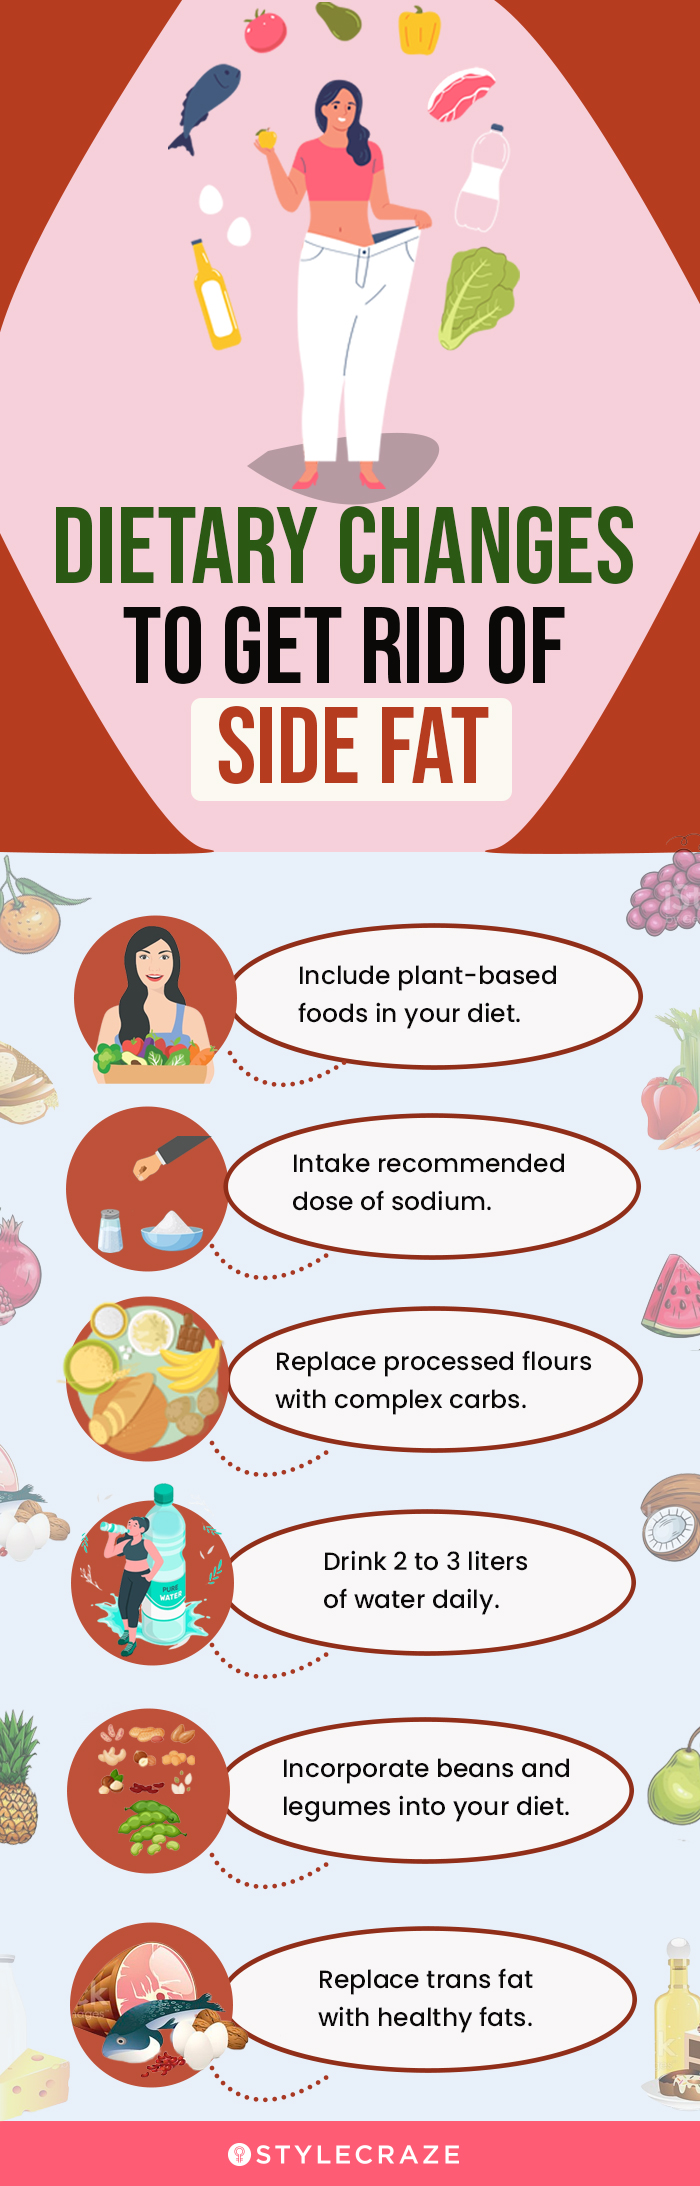 dietary changes to get rid of side fat [infographic]